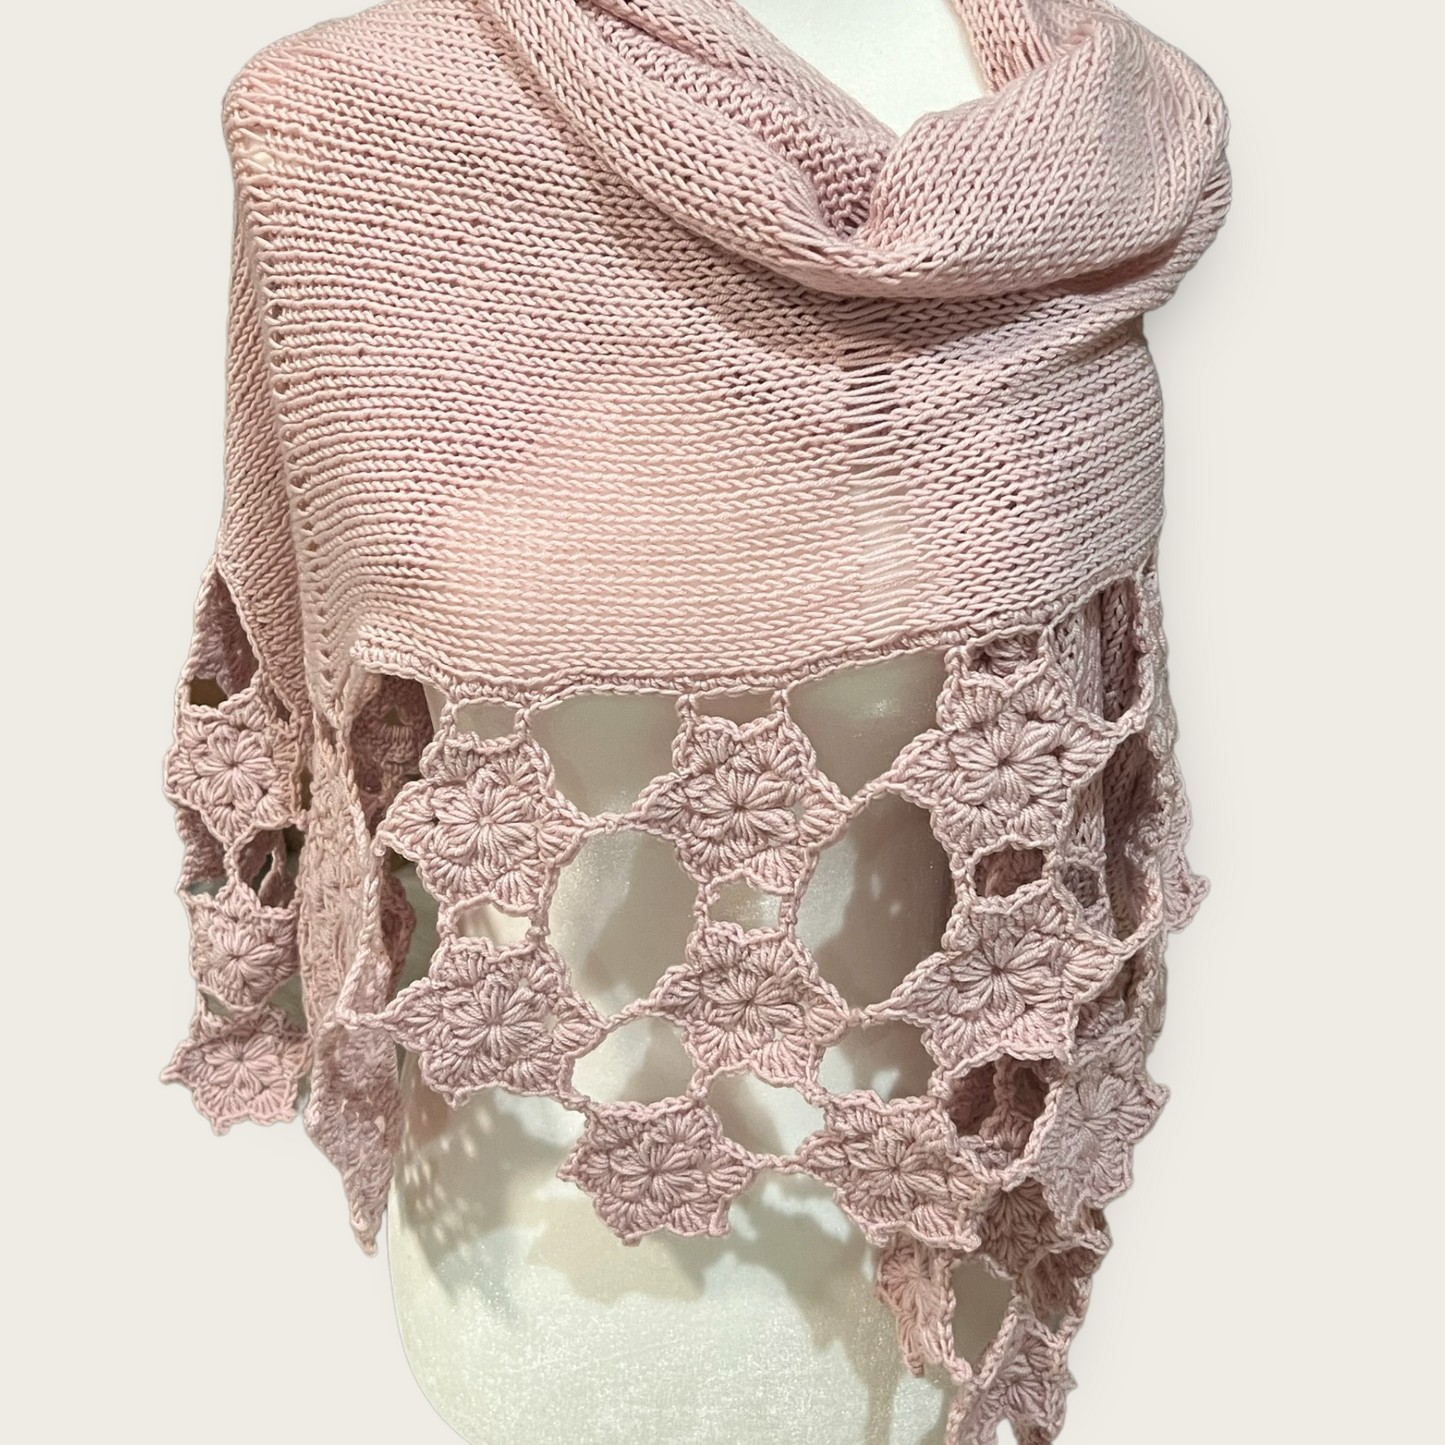 The Pink Flower Scarf